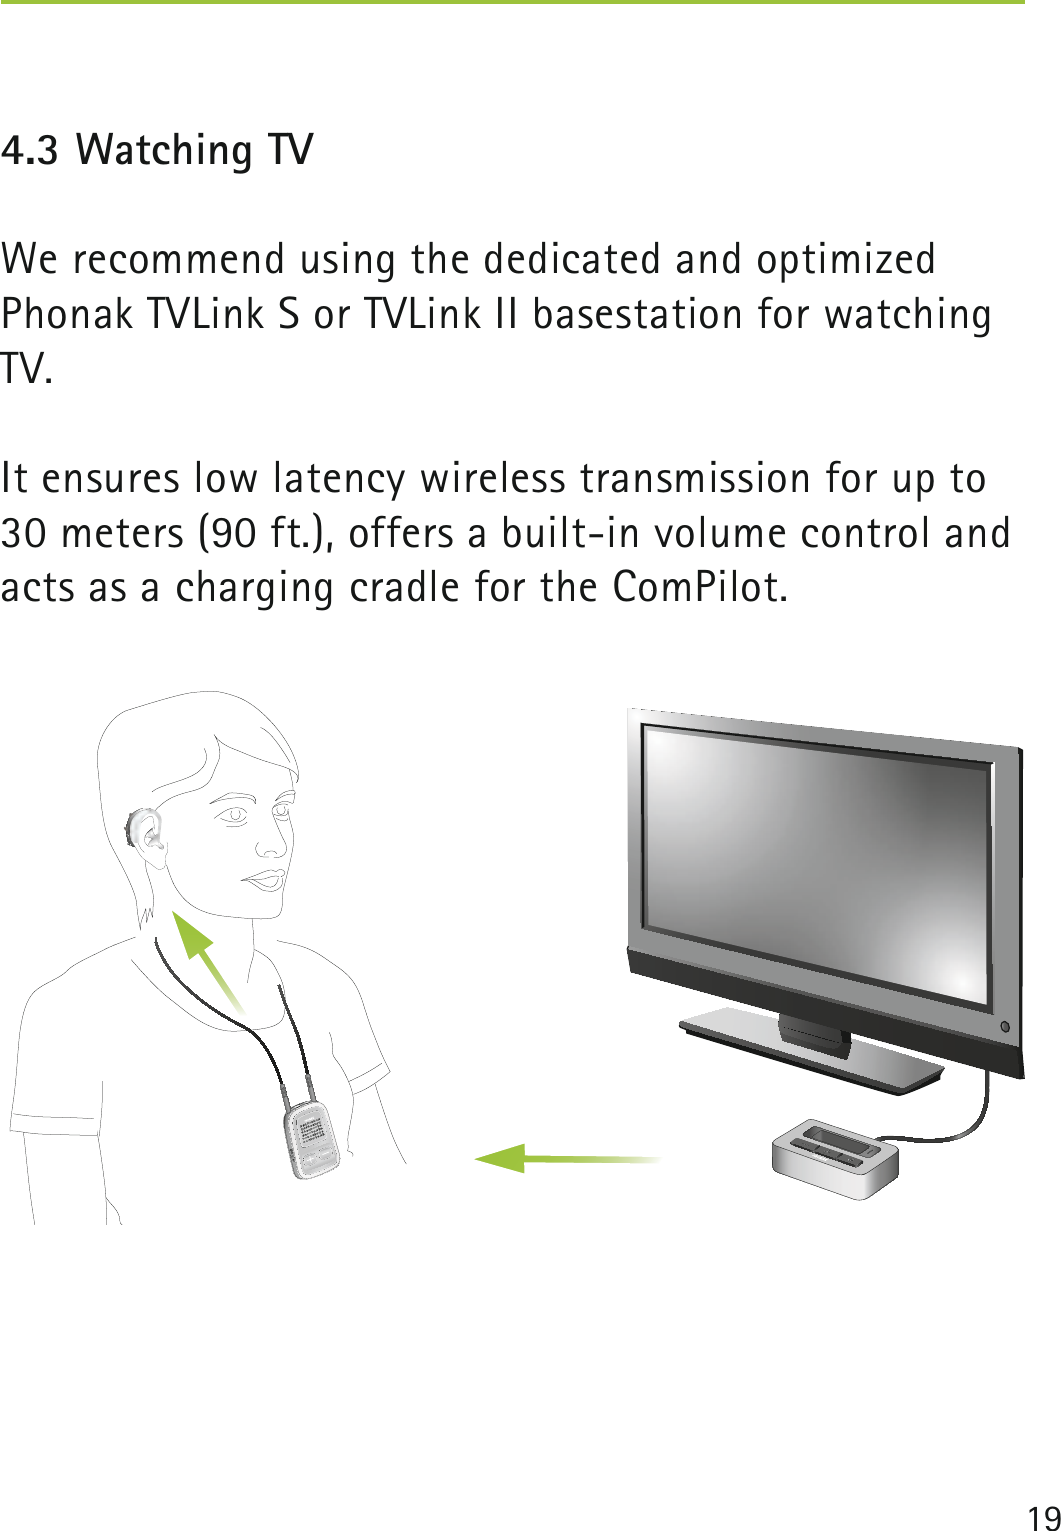 194.3 Watching TV  We recommend using the dedicated and optimized Phonak TVLink S or TVLink II basestation for watching TV. It ensures low latency wireless transmission for up to 30 meters (90 ft.), offers a built-in volume control and acts as a charging cradle for the ComPilot.poweraudio 